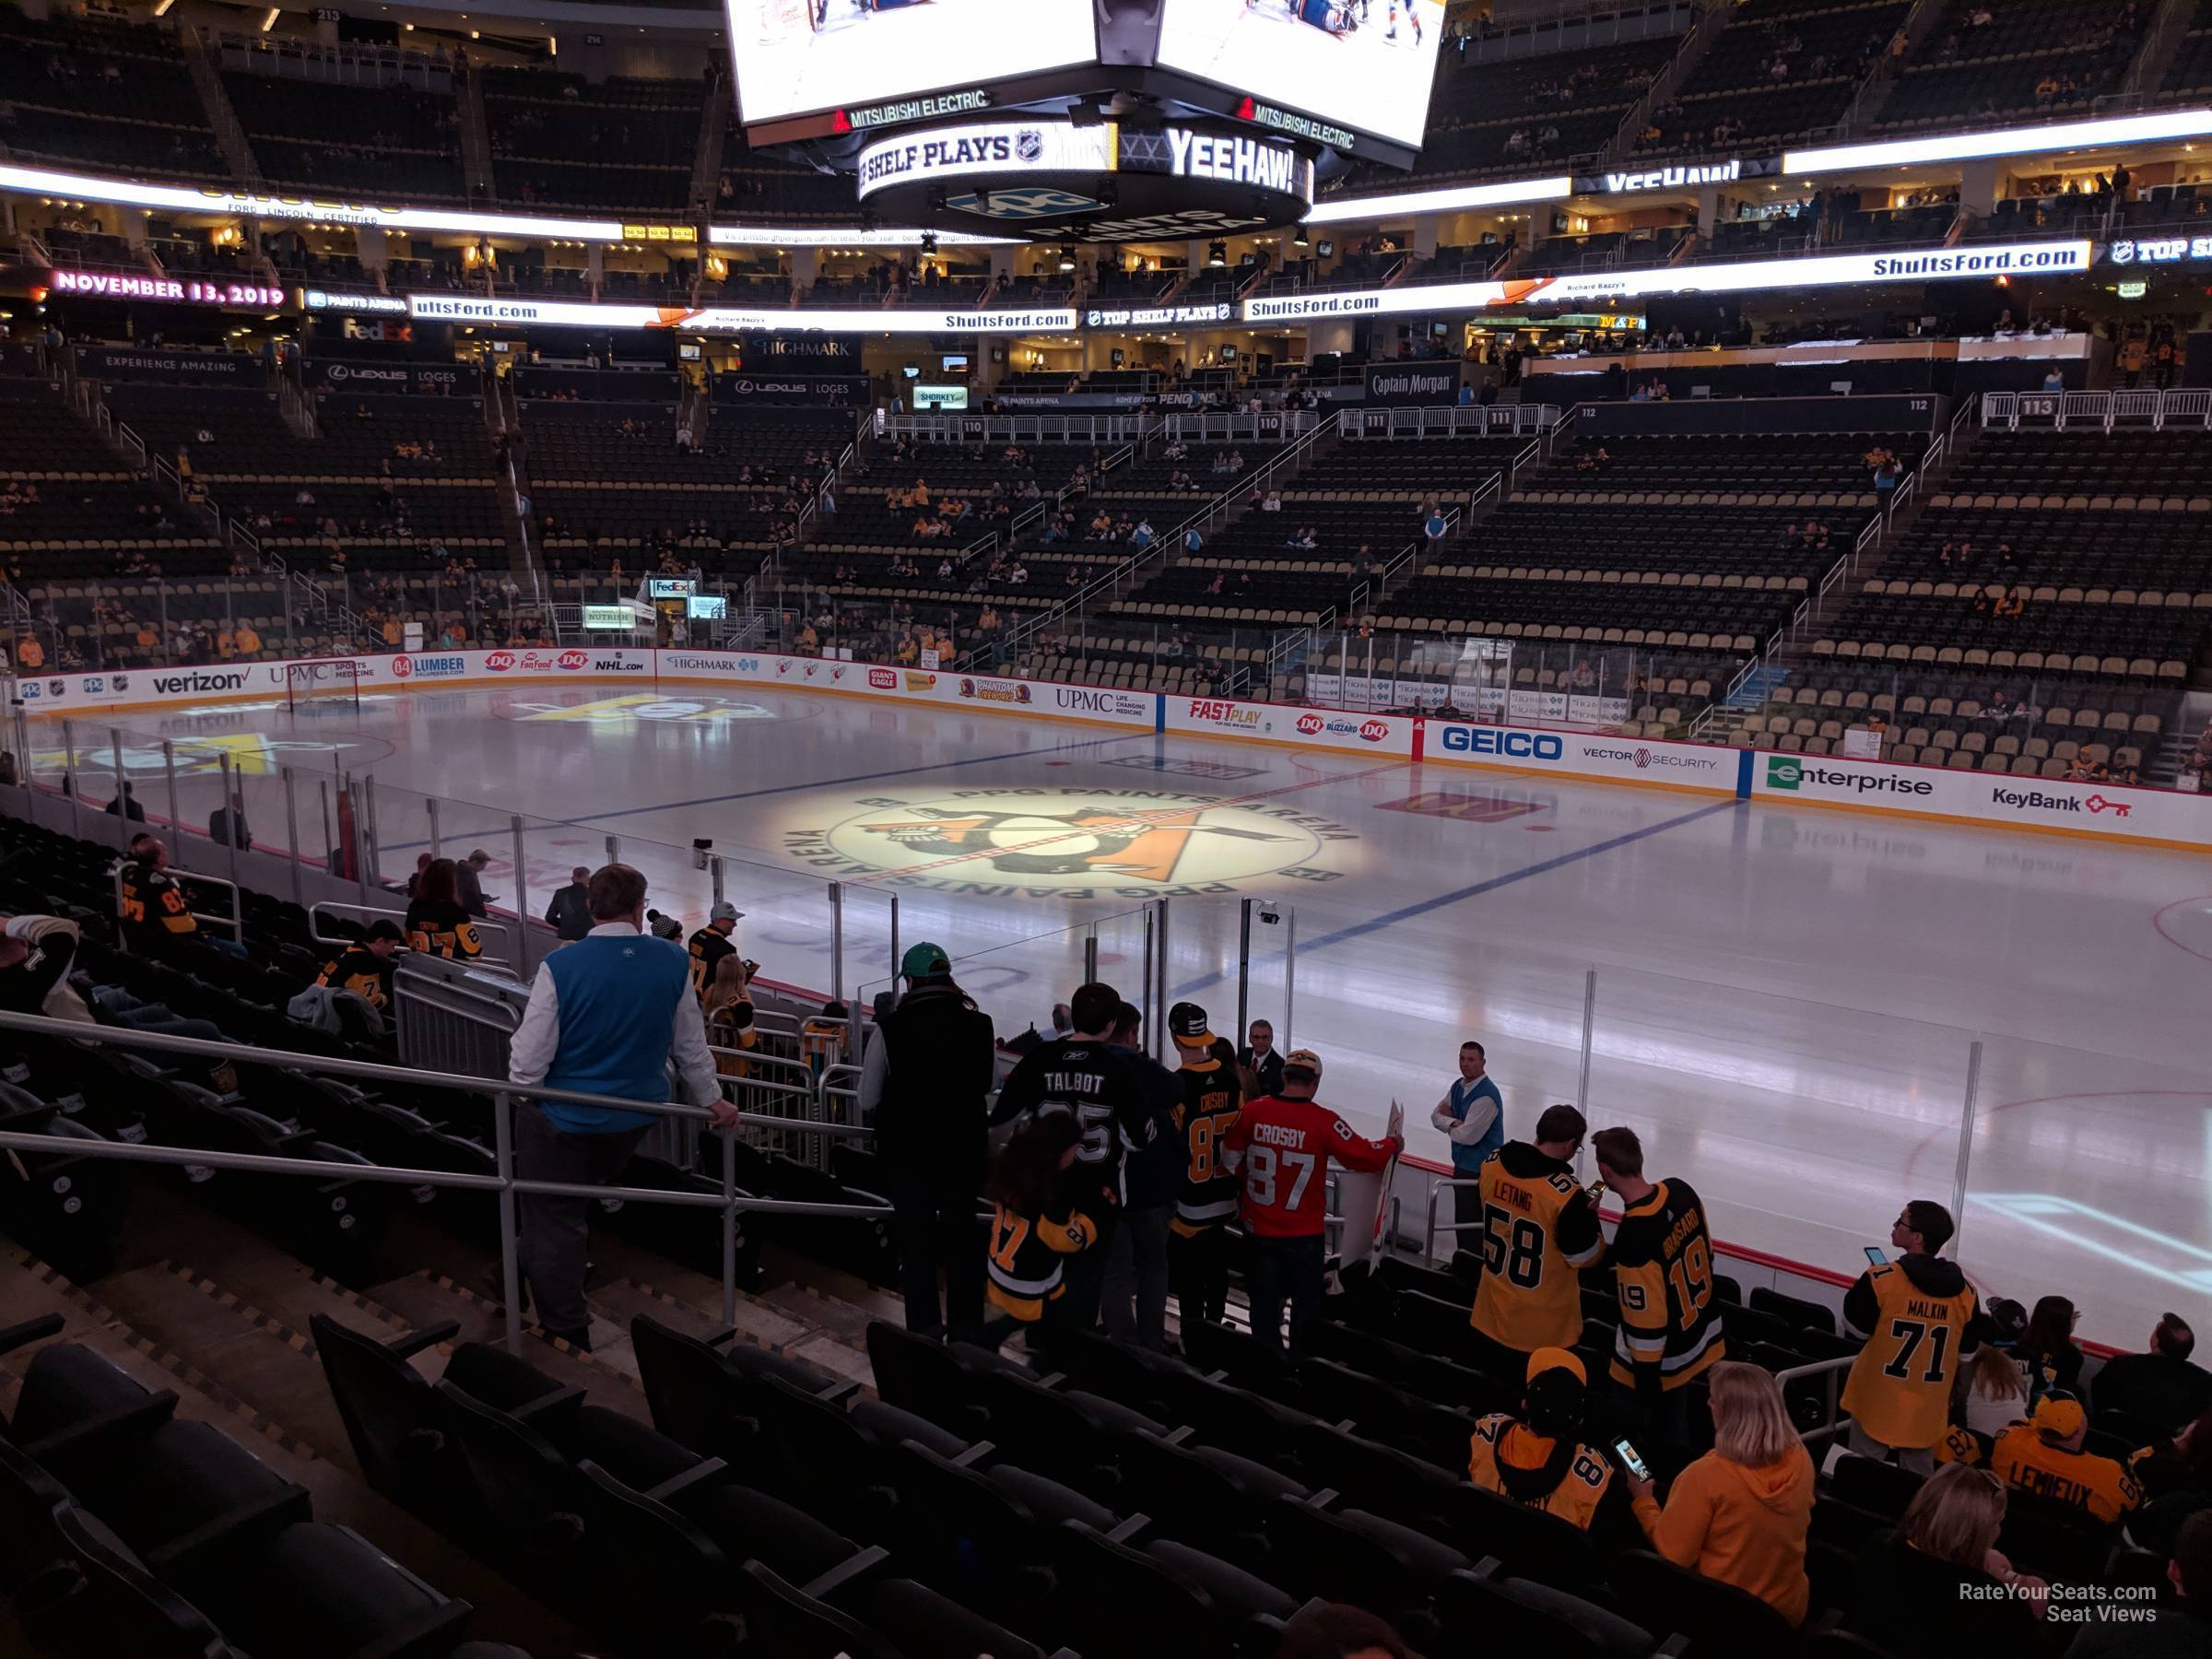 Section 207 at PPG Paints Arena 